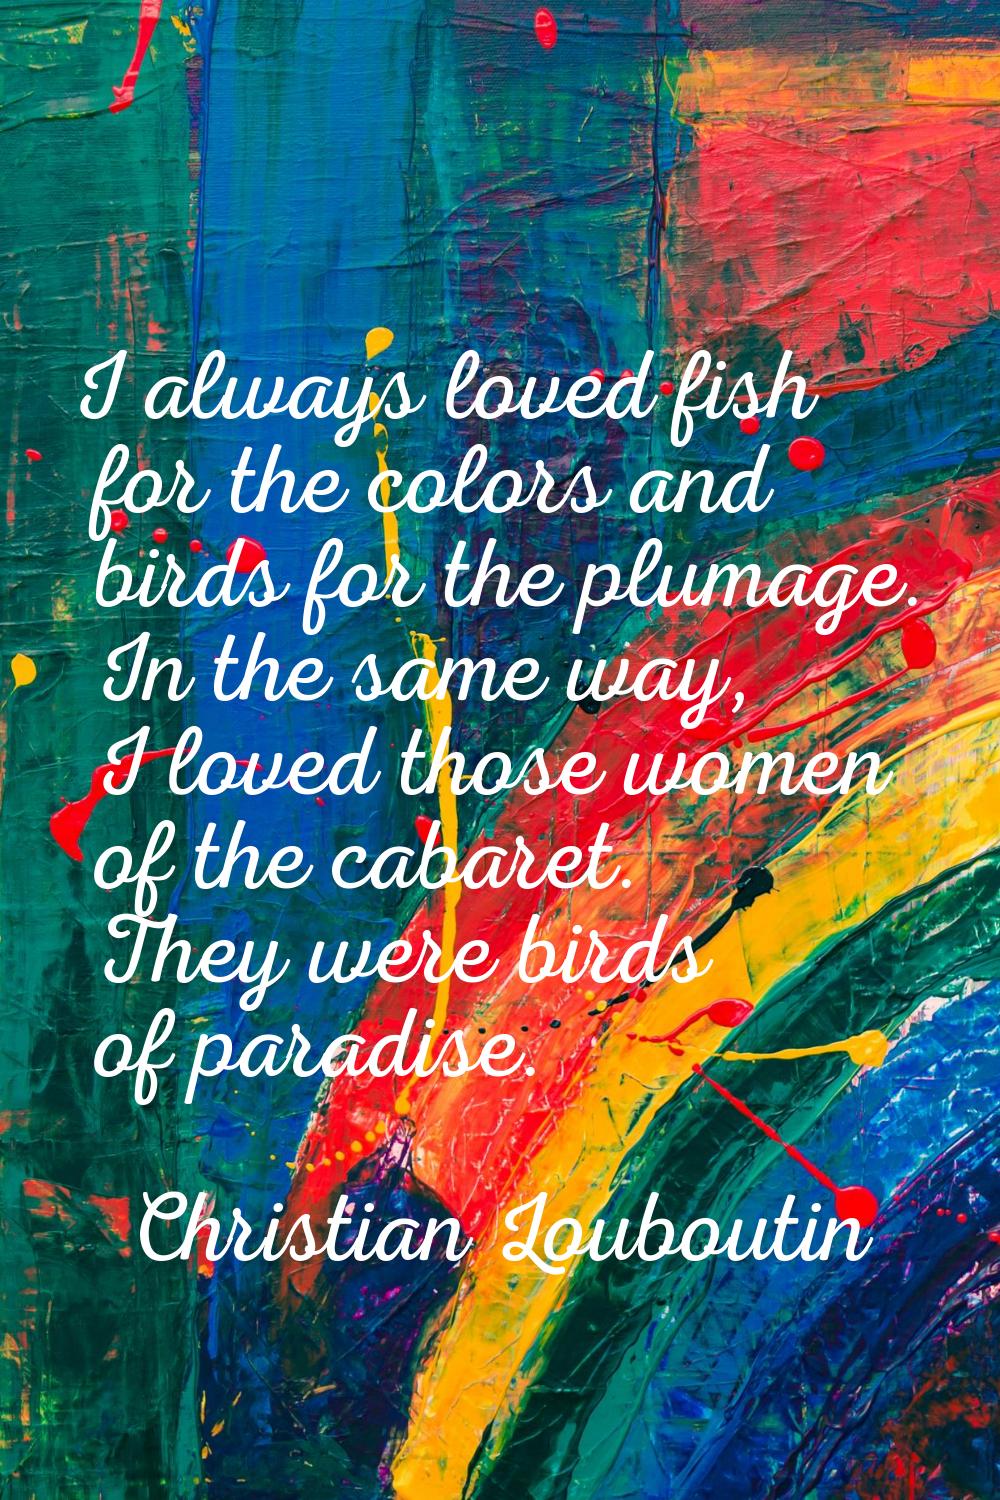 I always loved fish for the colors and birds for the plumage. In the same way, I loved those women 